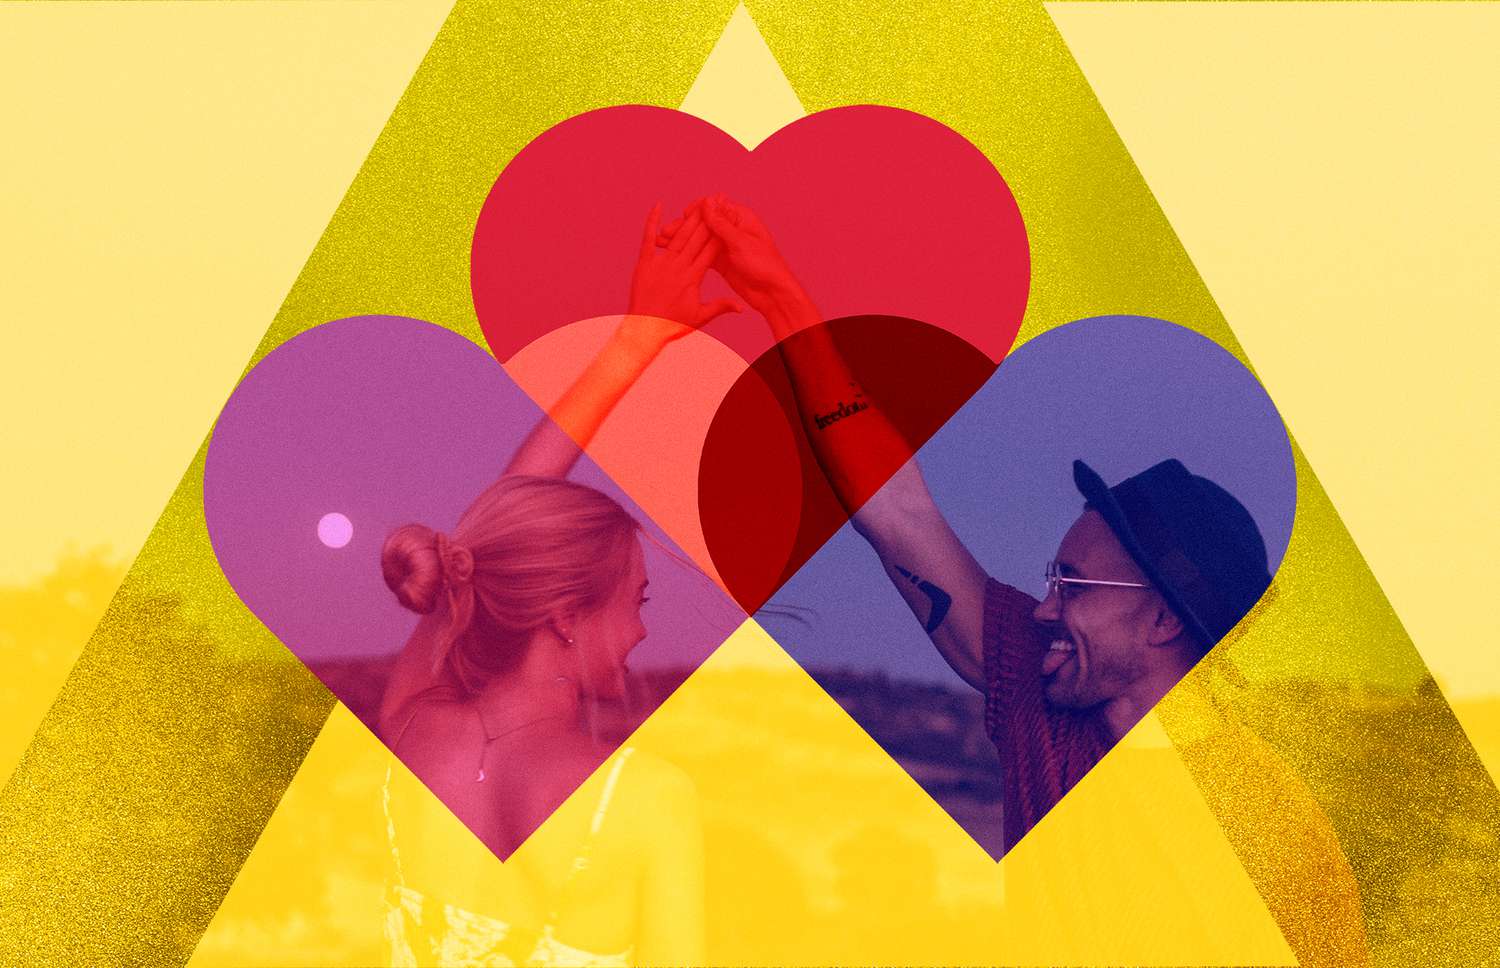 What You Can Learn from the Triangular Theory of Love